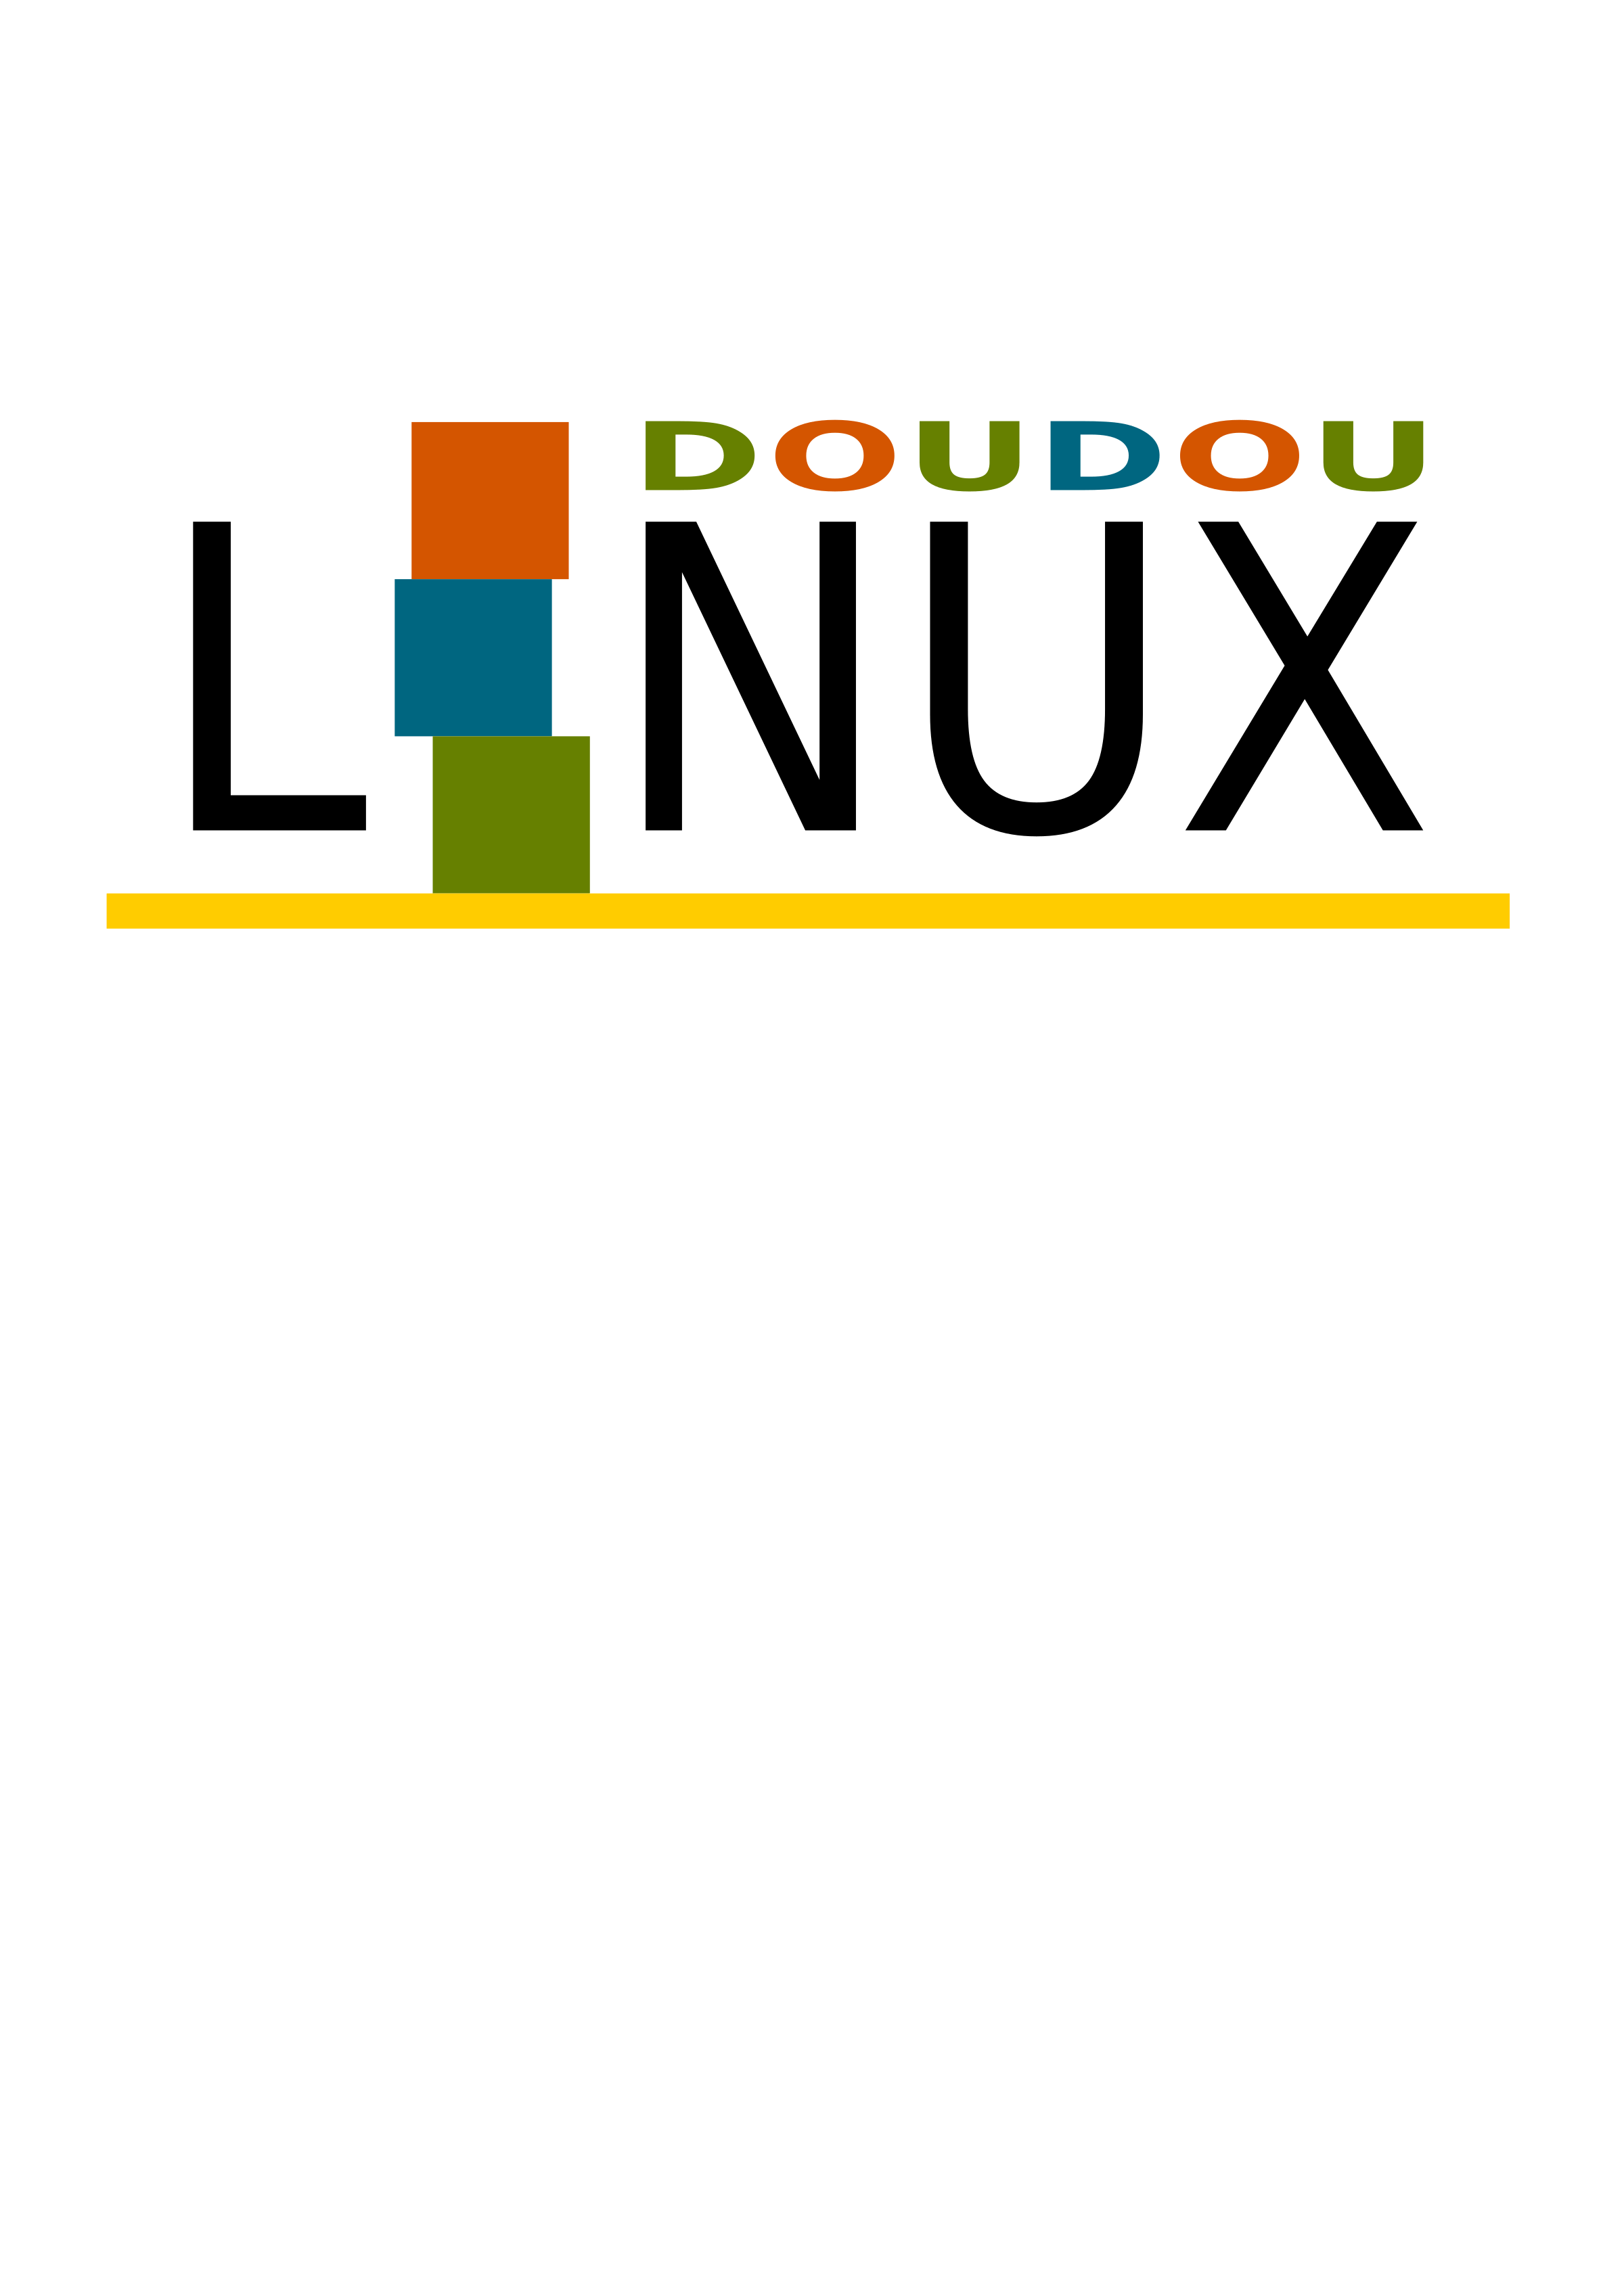 Original Linux Logo - doudou linux logo proposal Icons PNG - Free PNG and Icons Downloads